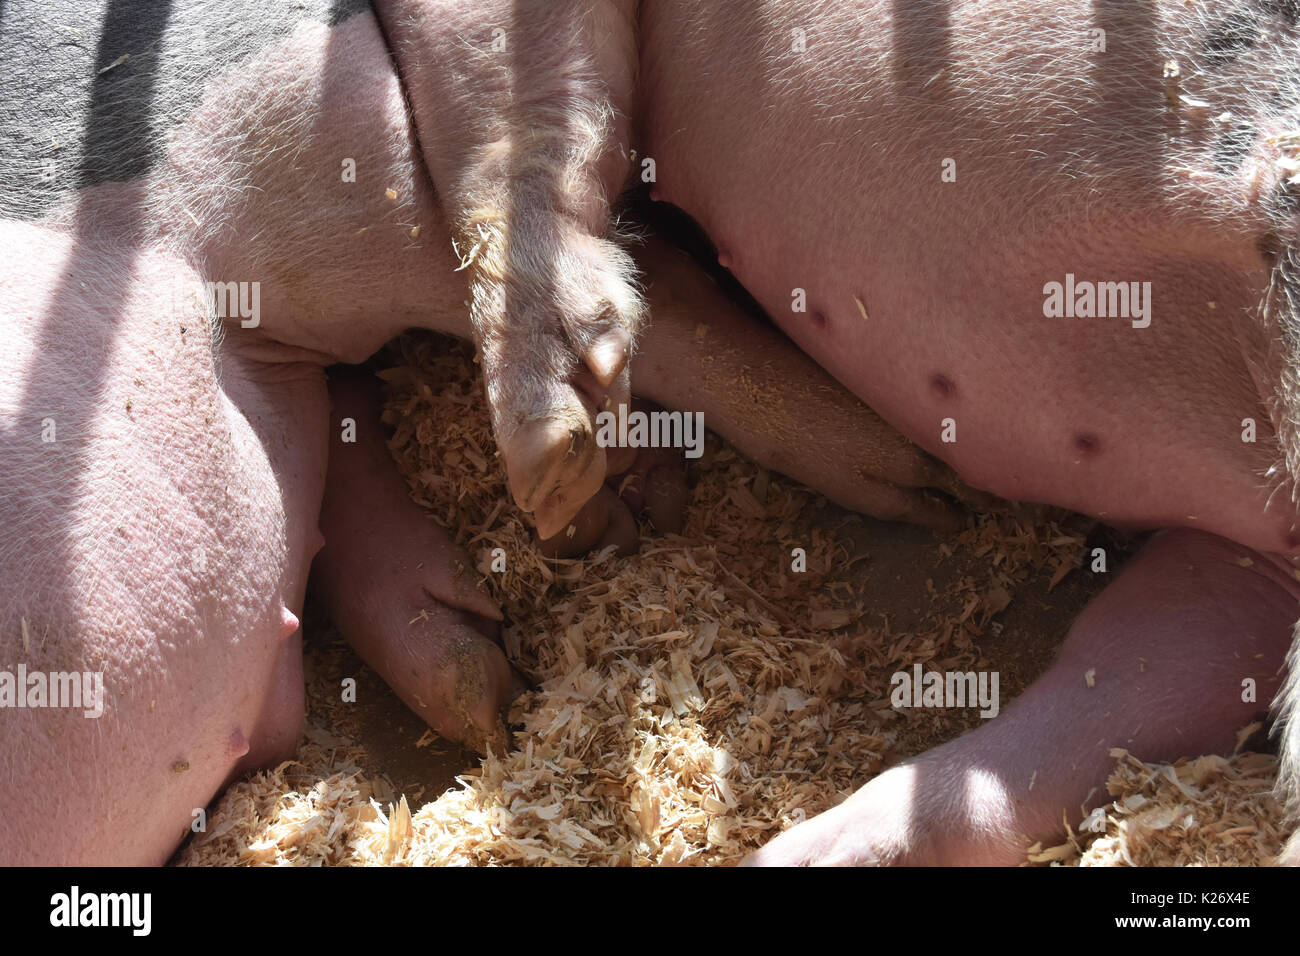 Closeup of pigs hoofs and bellies Stock Photo